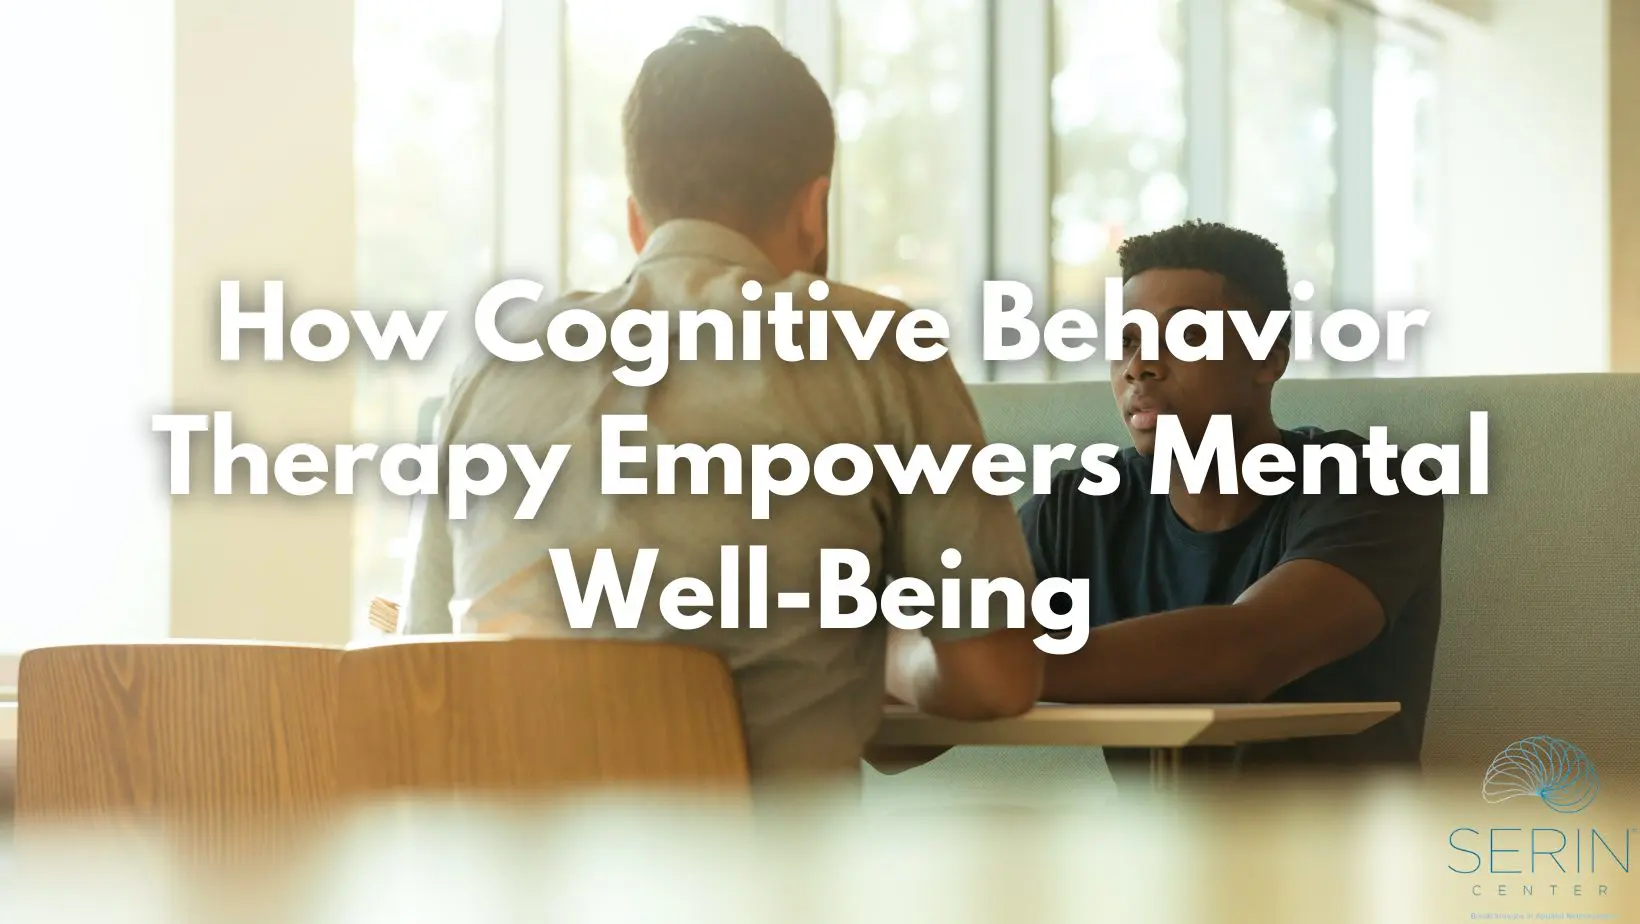 cognitive behavior therapy empowering mental well-being